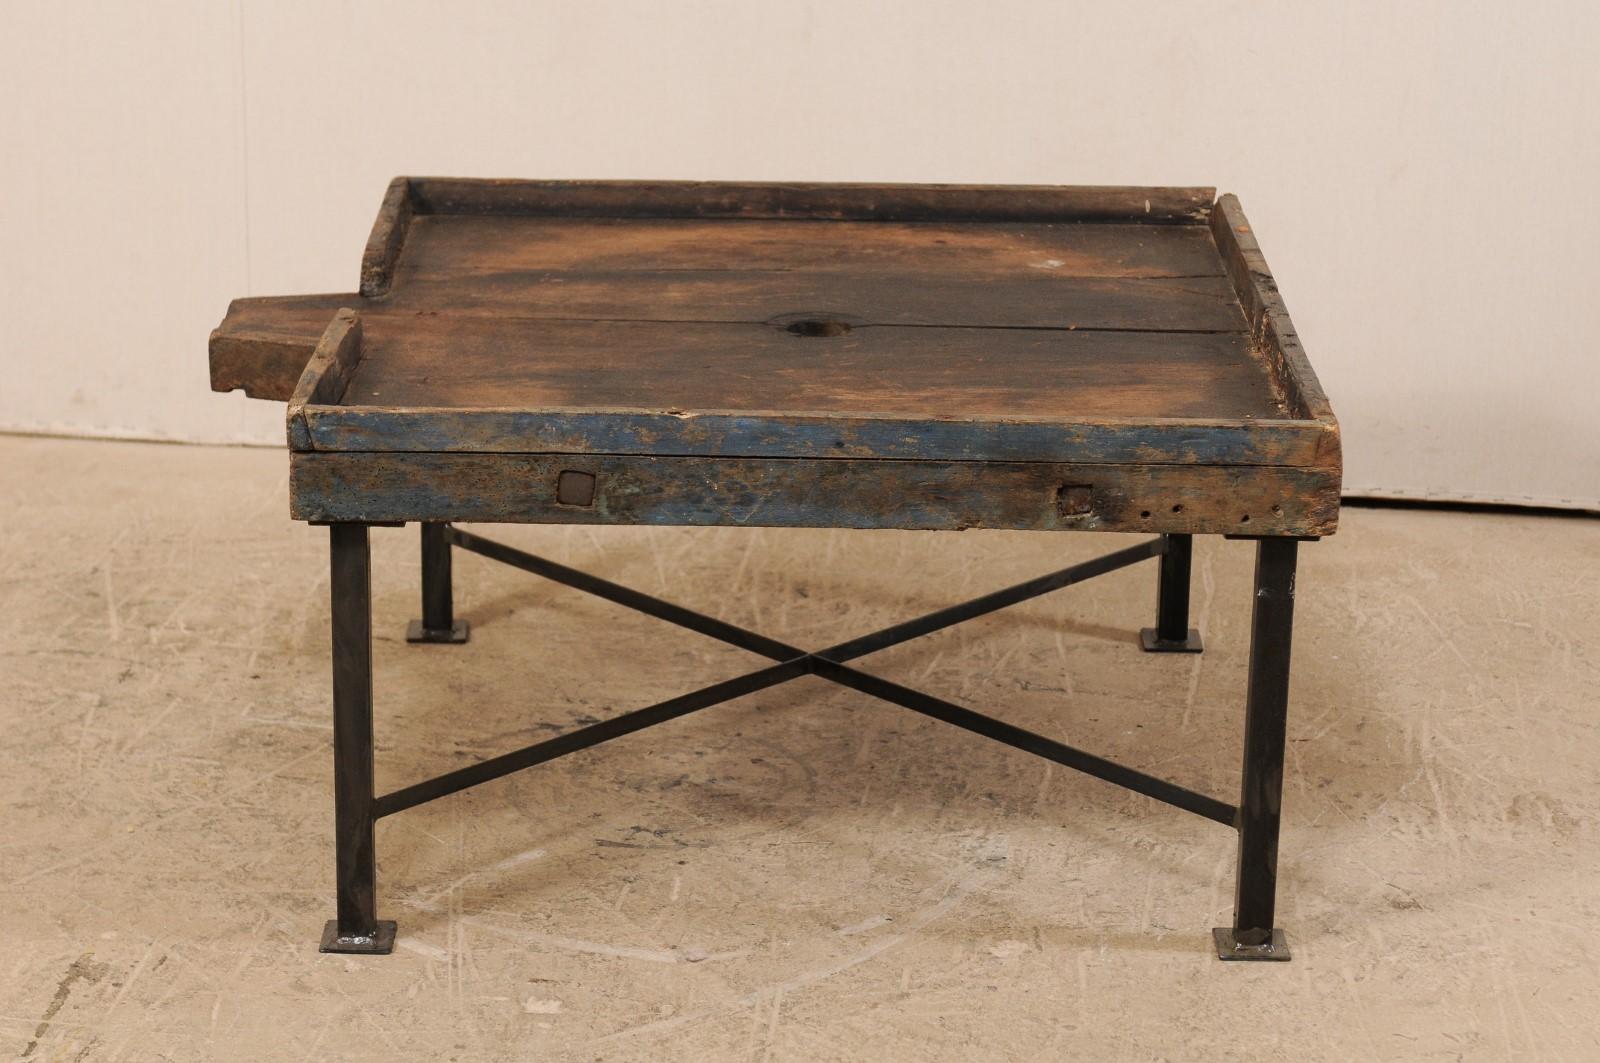 A 19th century Spanish wood trough top coffee table. This fun little coffee table has been custom fashioned from an 19th century Spanish wooden trough, thought to have been used in the processing of olives, and raised upon a custom black metal